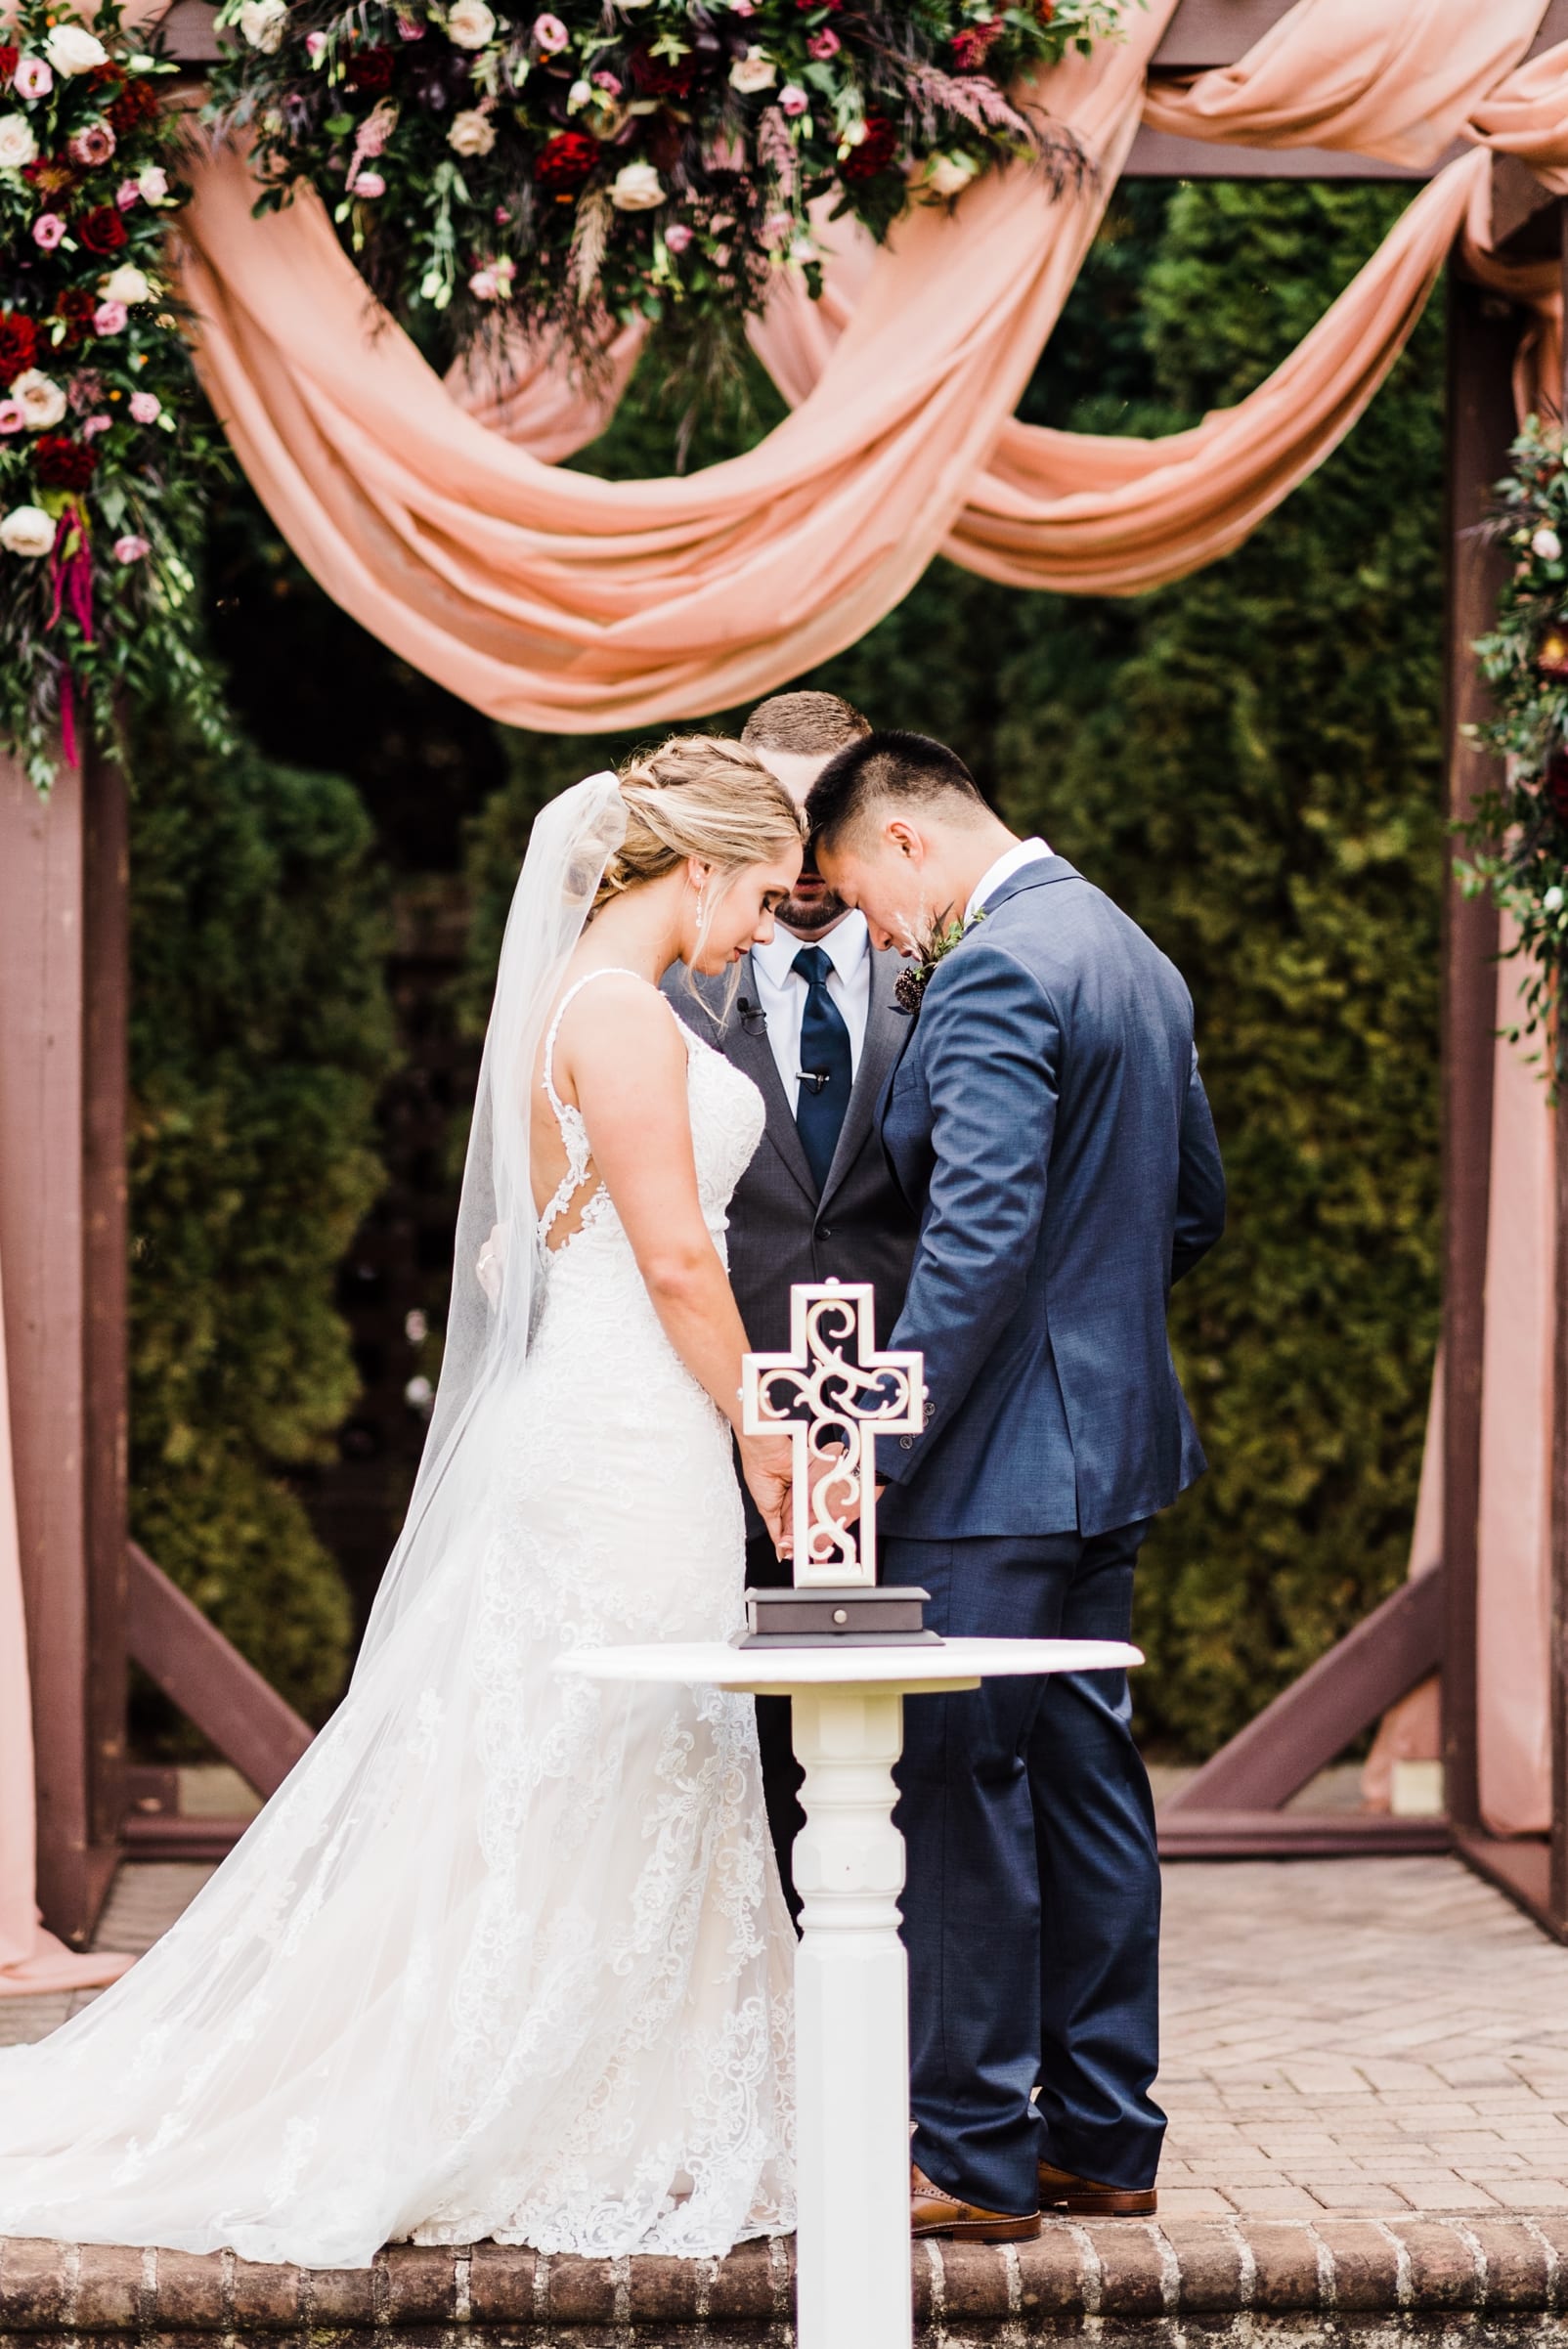 sutherland estate wedding photographer unity cross wedding ceremony site with florals arbor with fabric draping photo